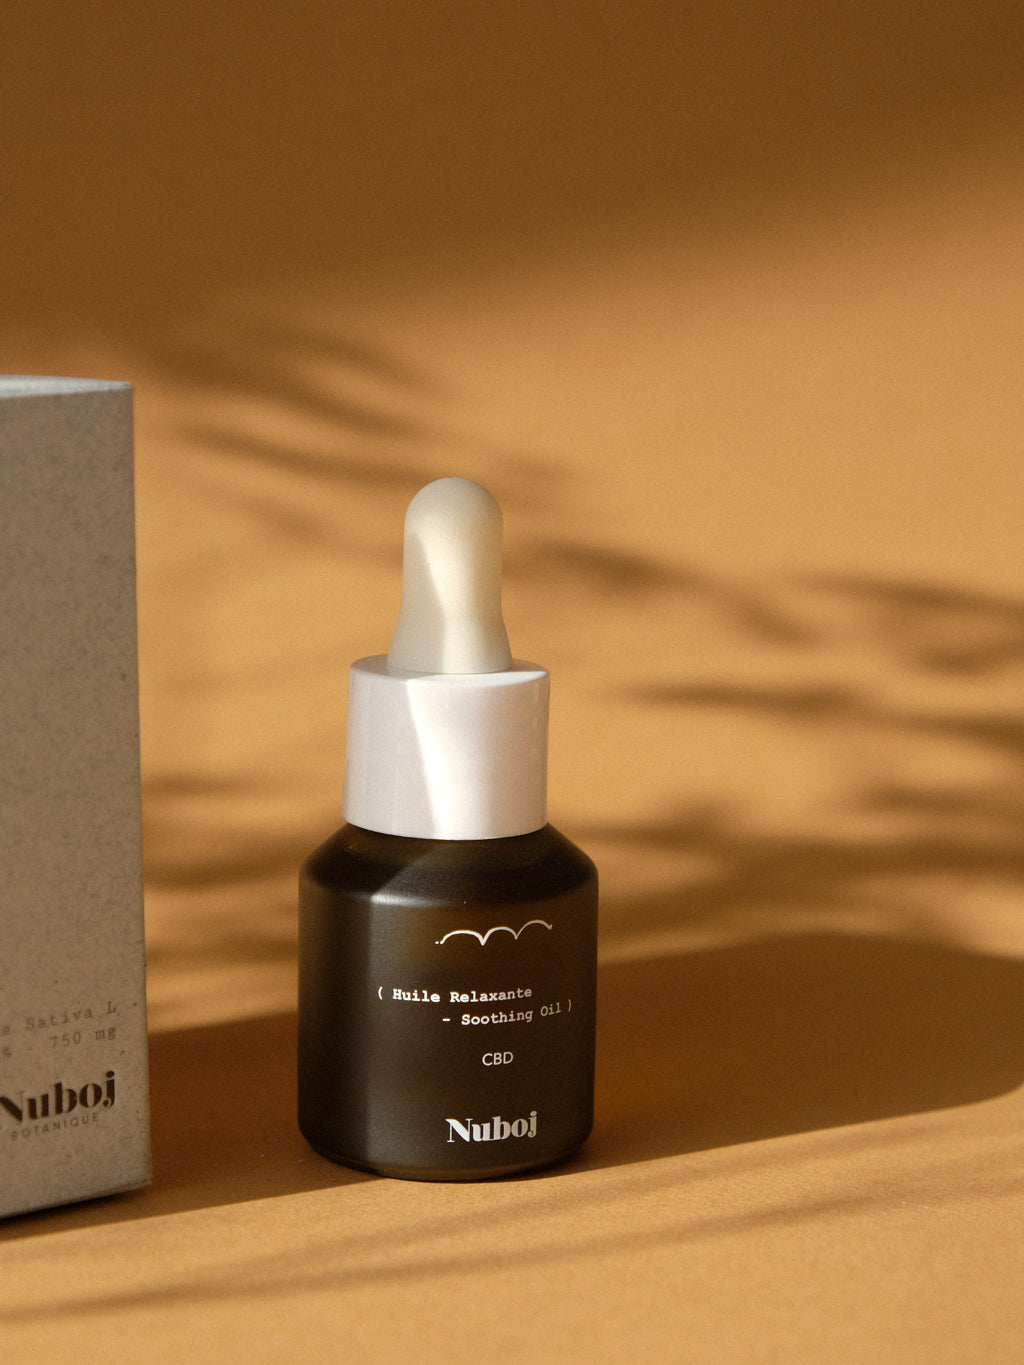 Nuboj - Soothing Face Oil With CBD | Inspiration Her